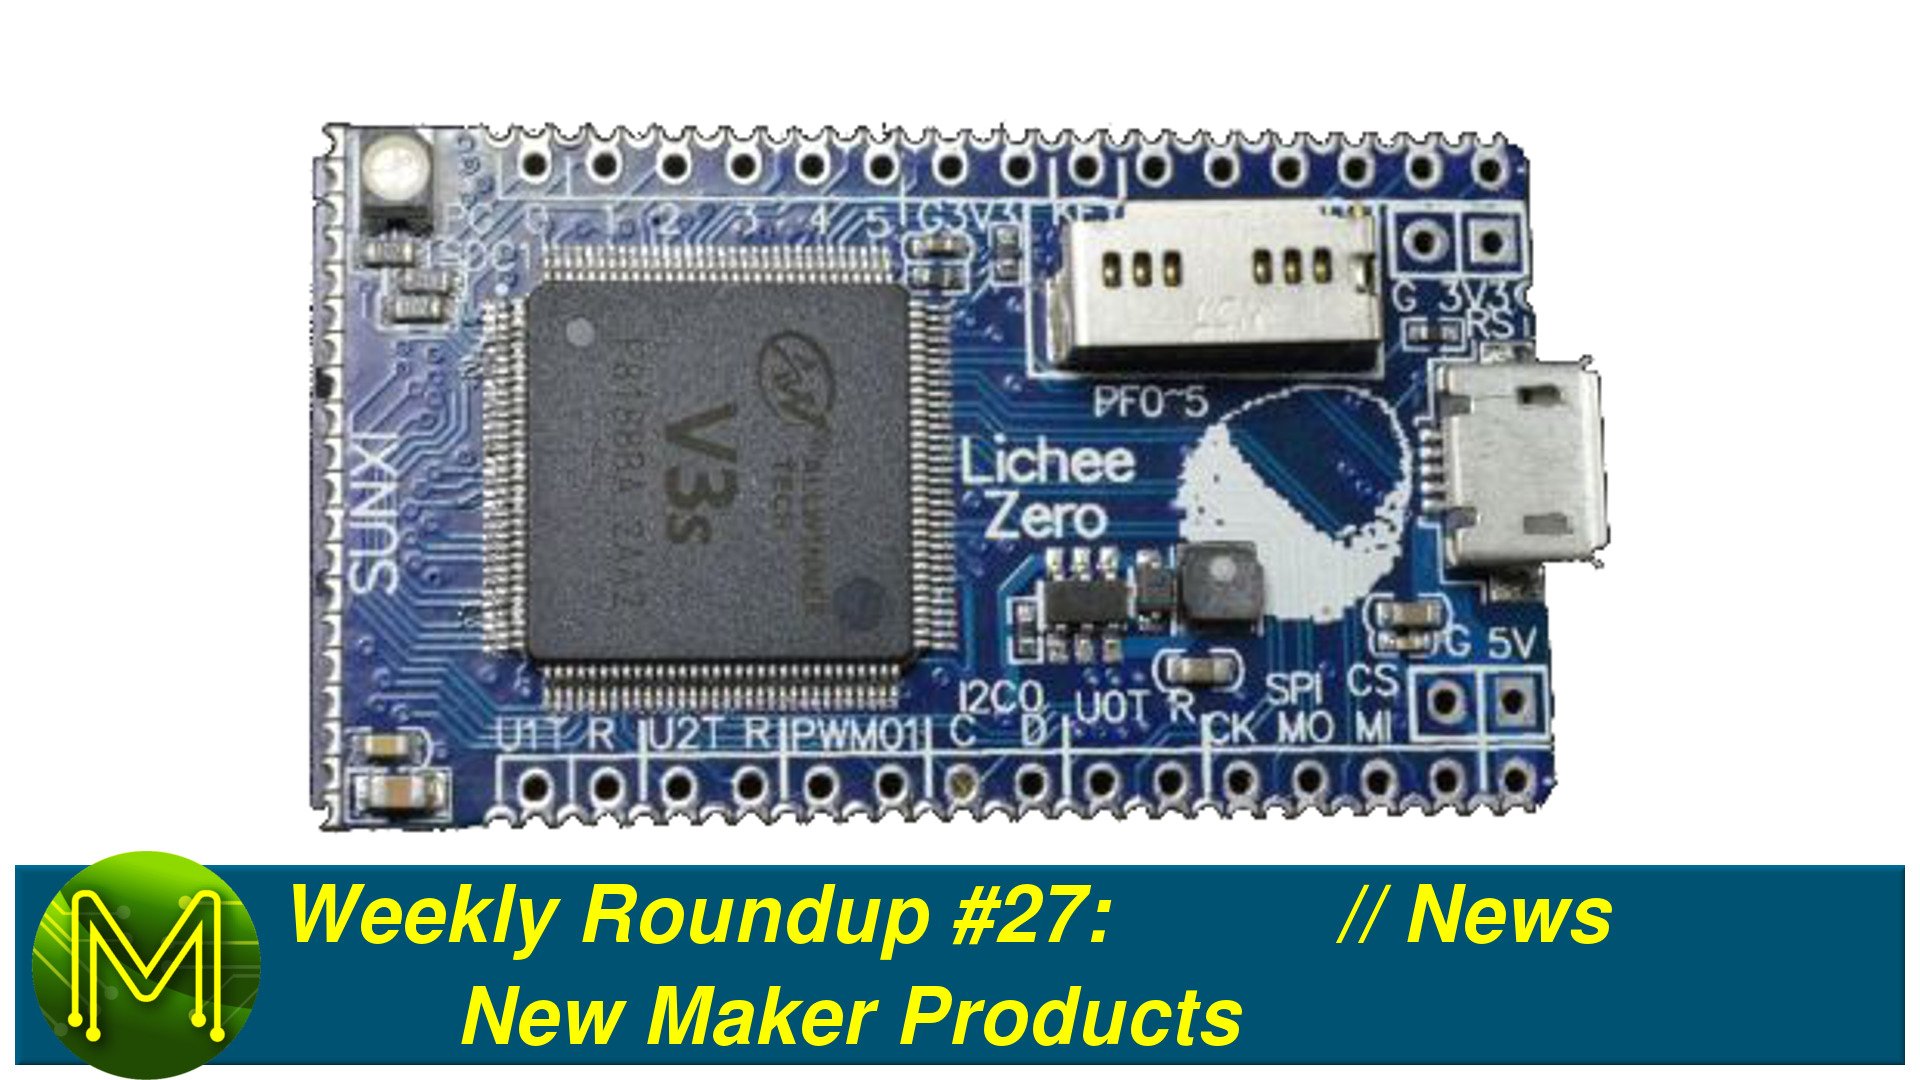 Weekly Roundup #27 - New Maker Products // News